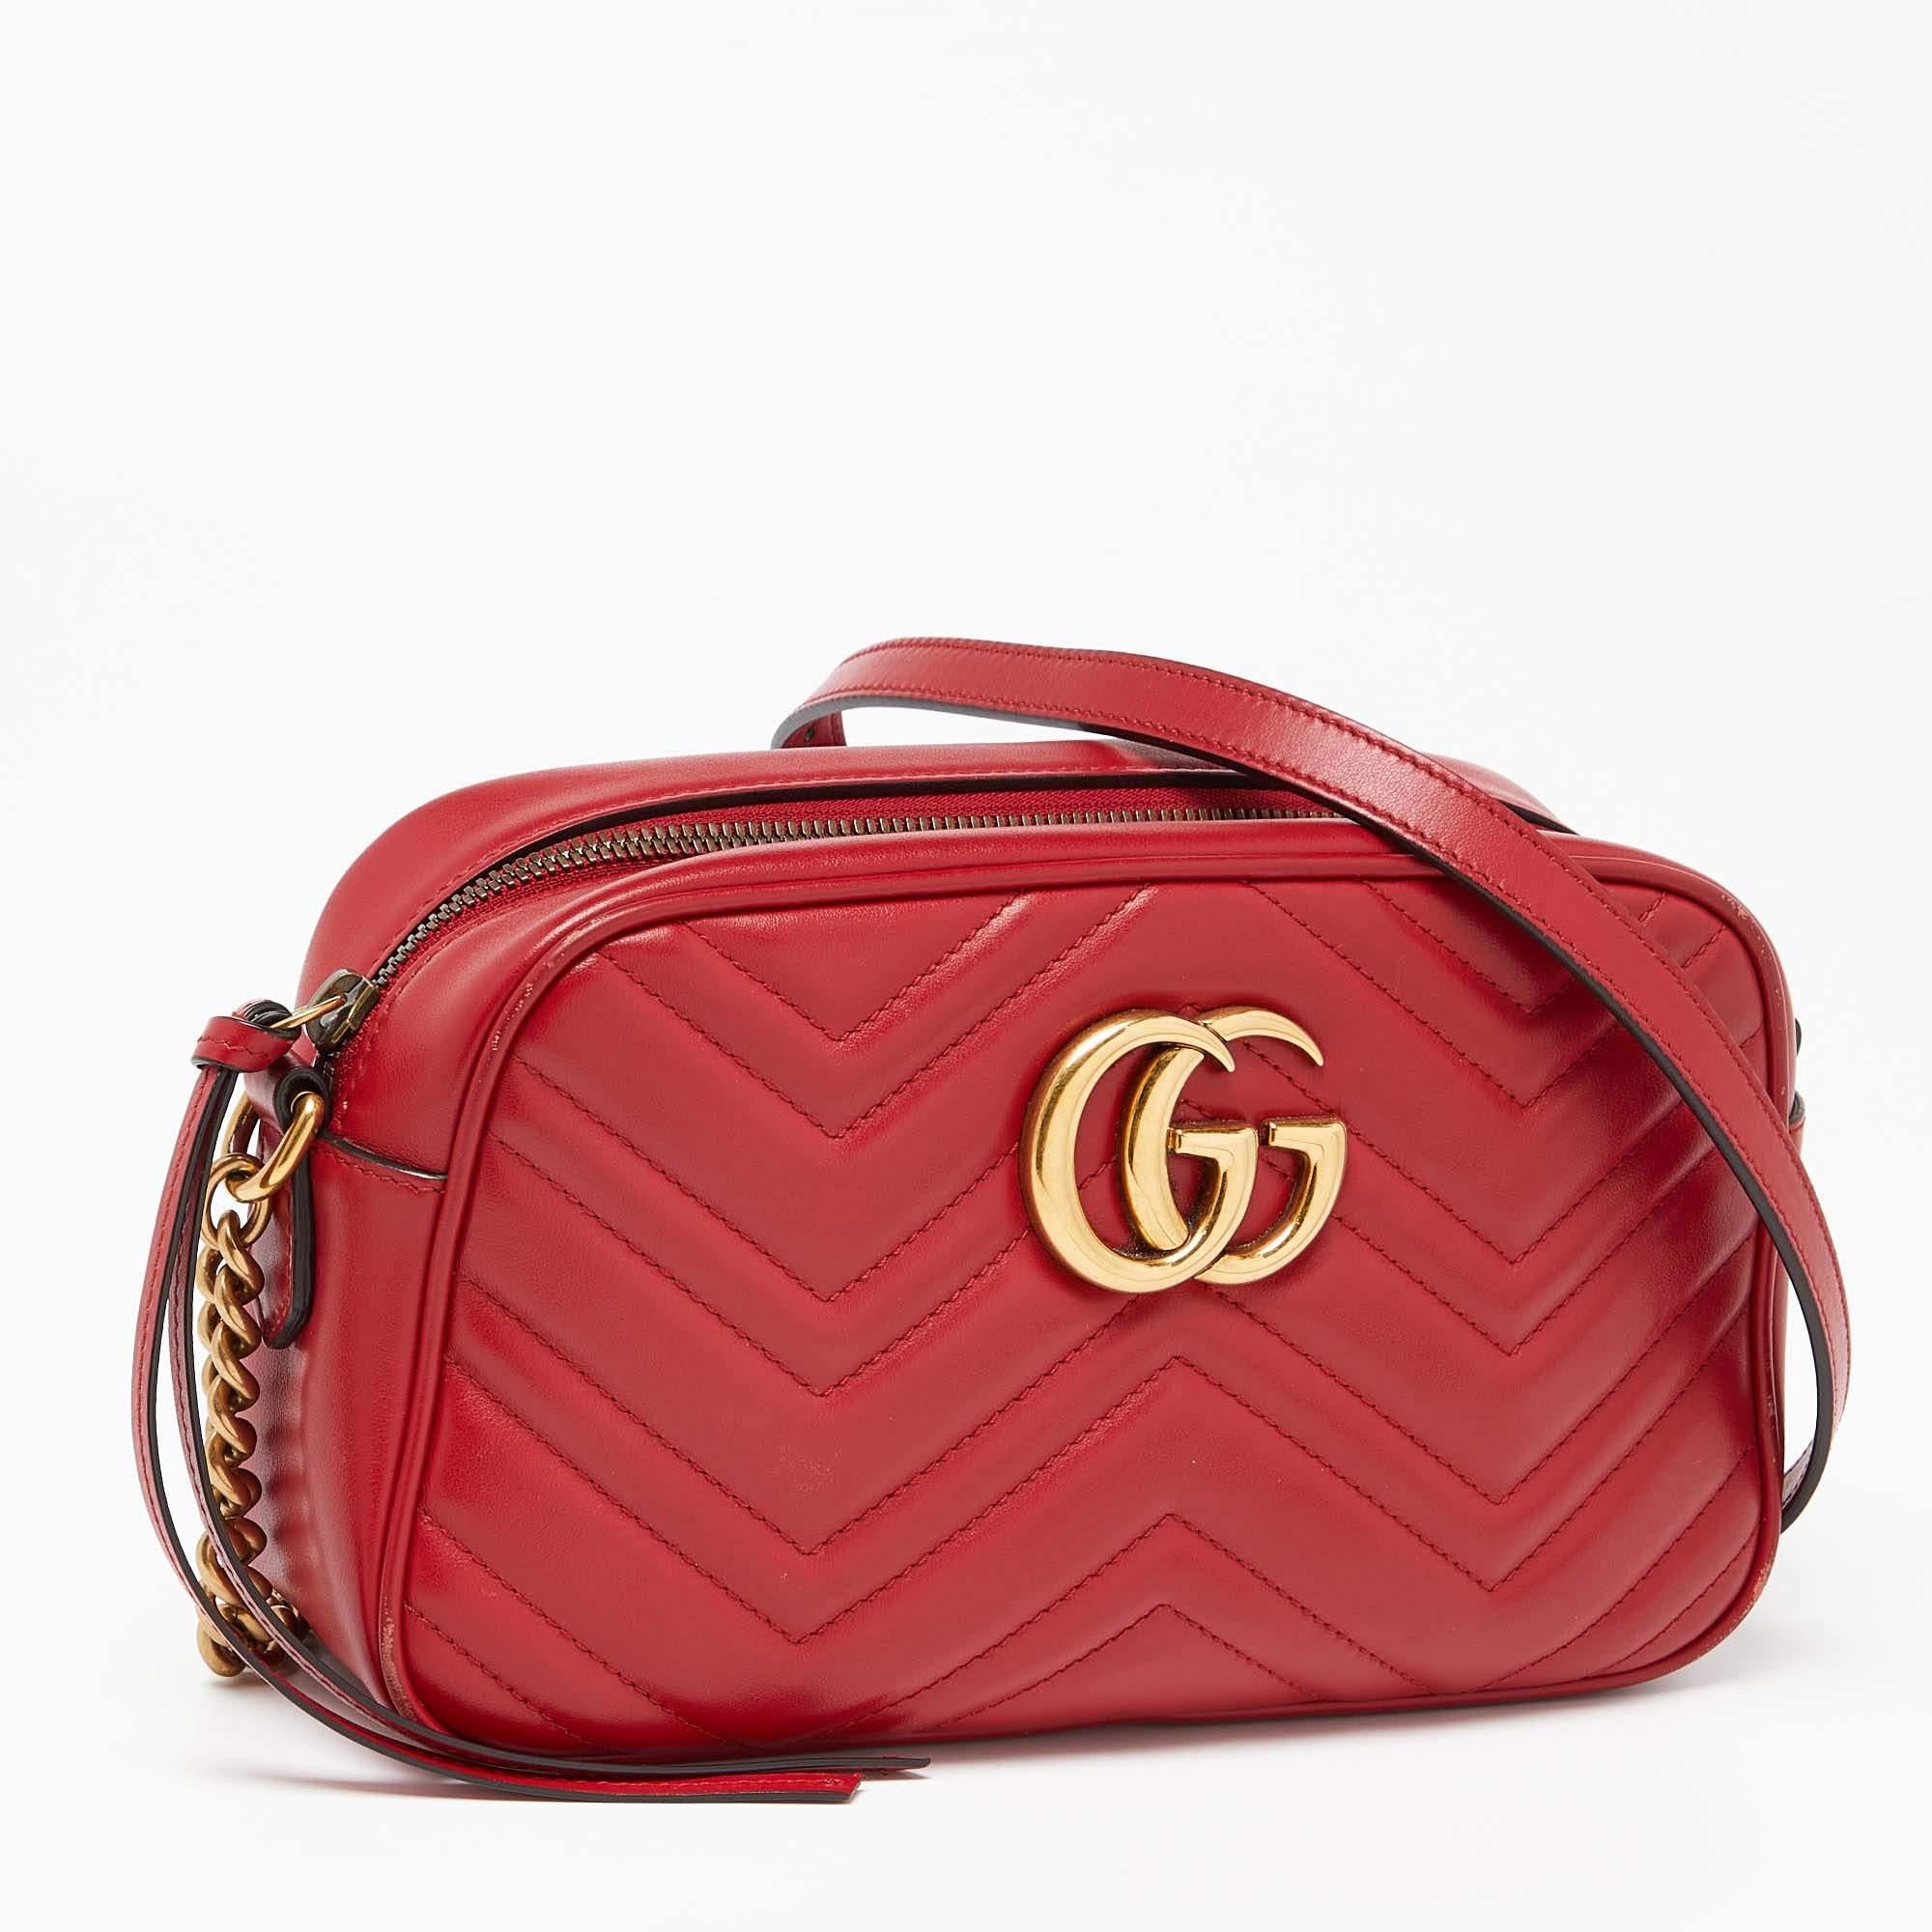 Women's Gucci Red Matelassé Leather Small GG Marmont Shoulder Bag For Sale